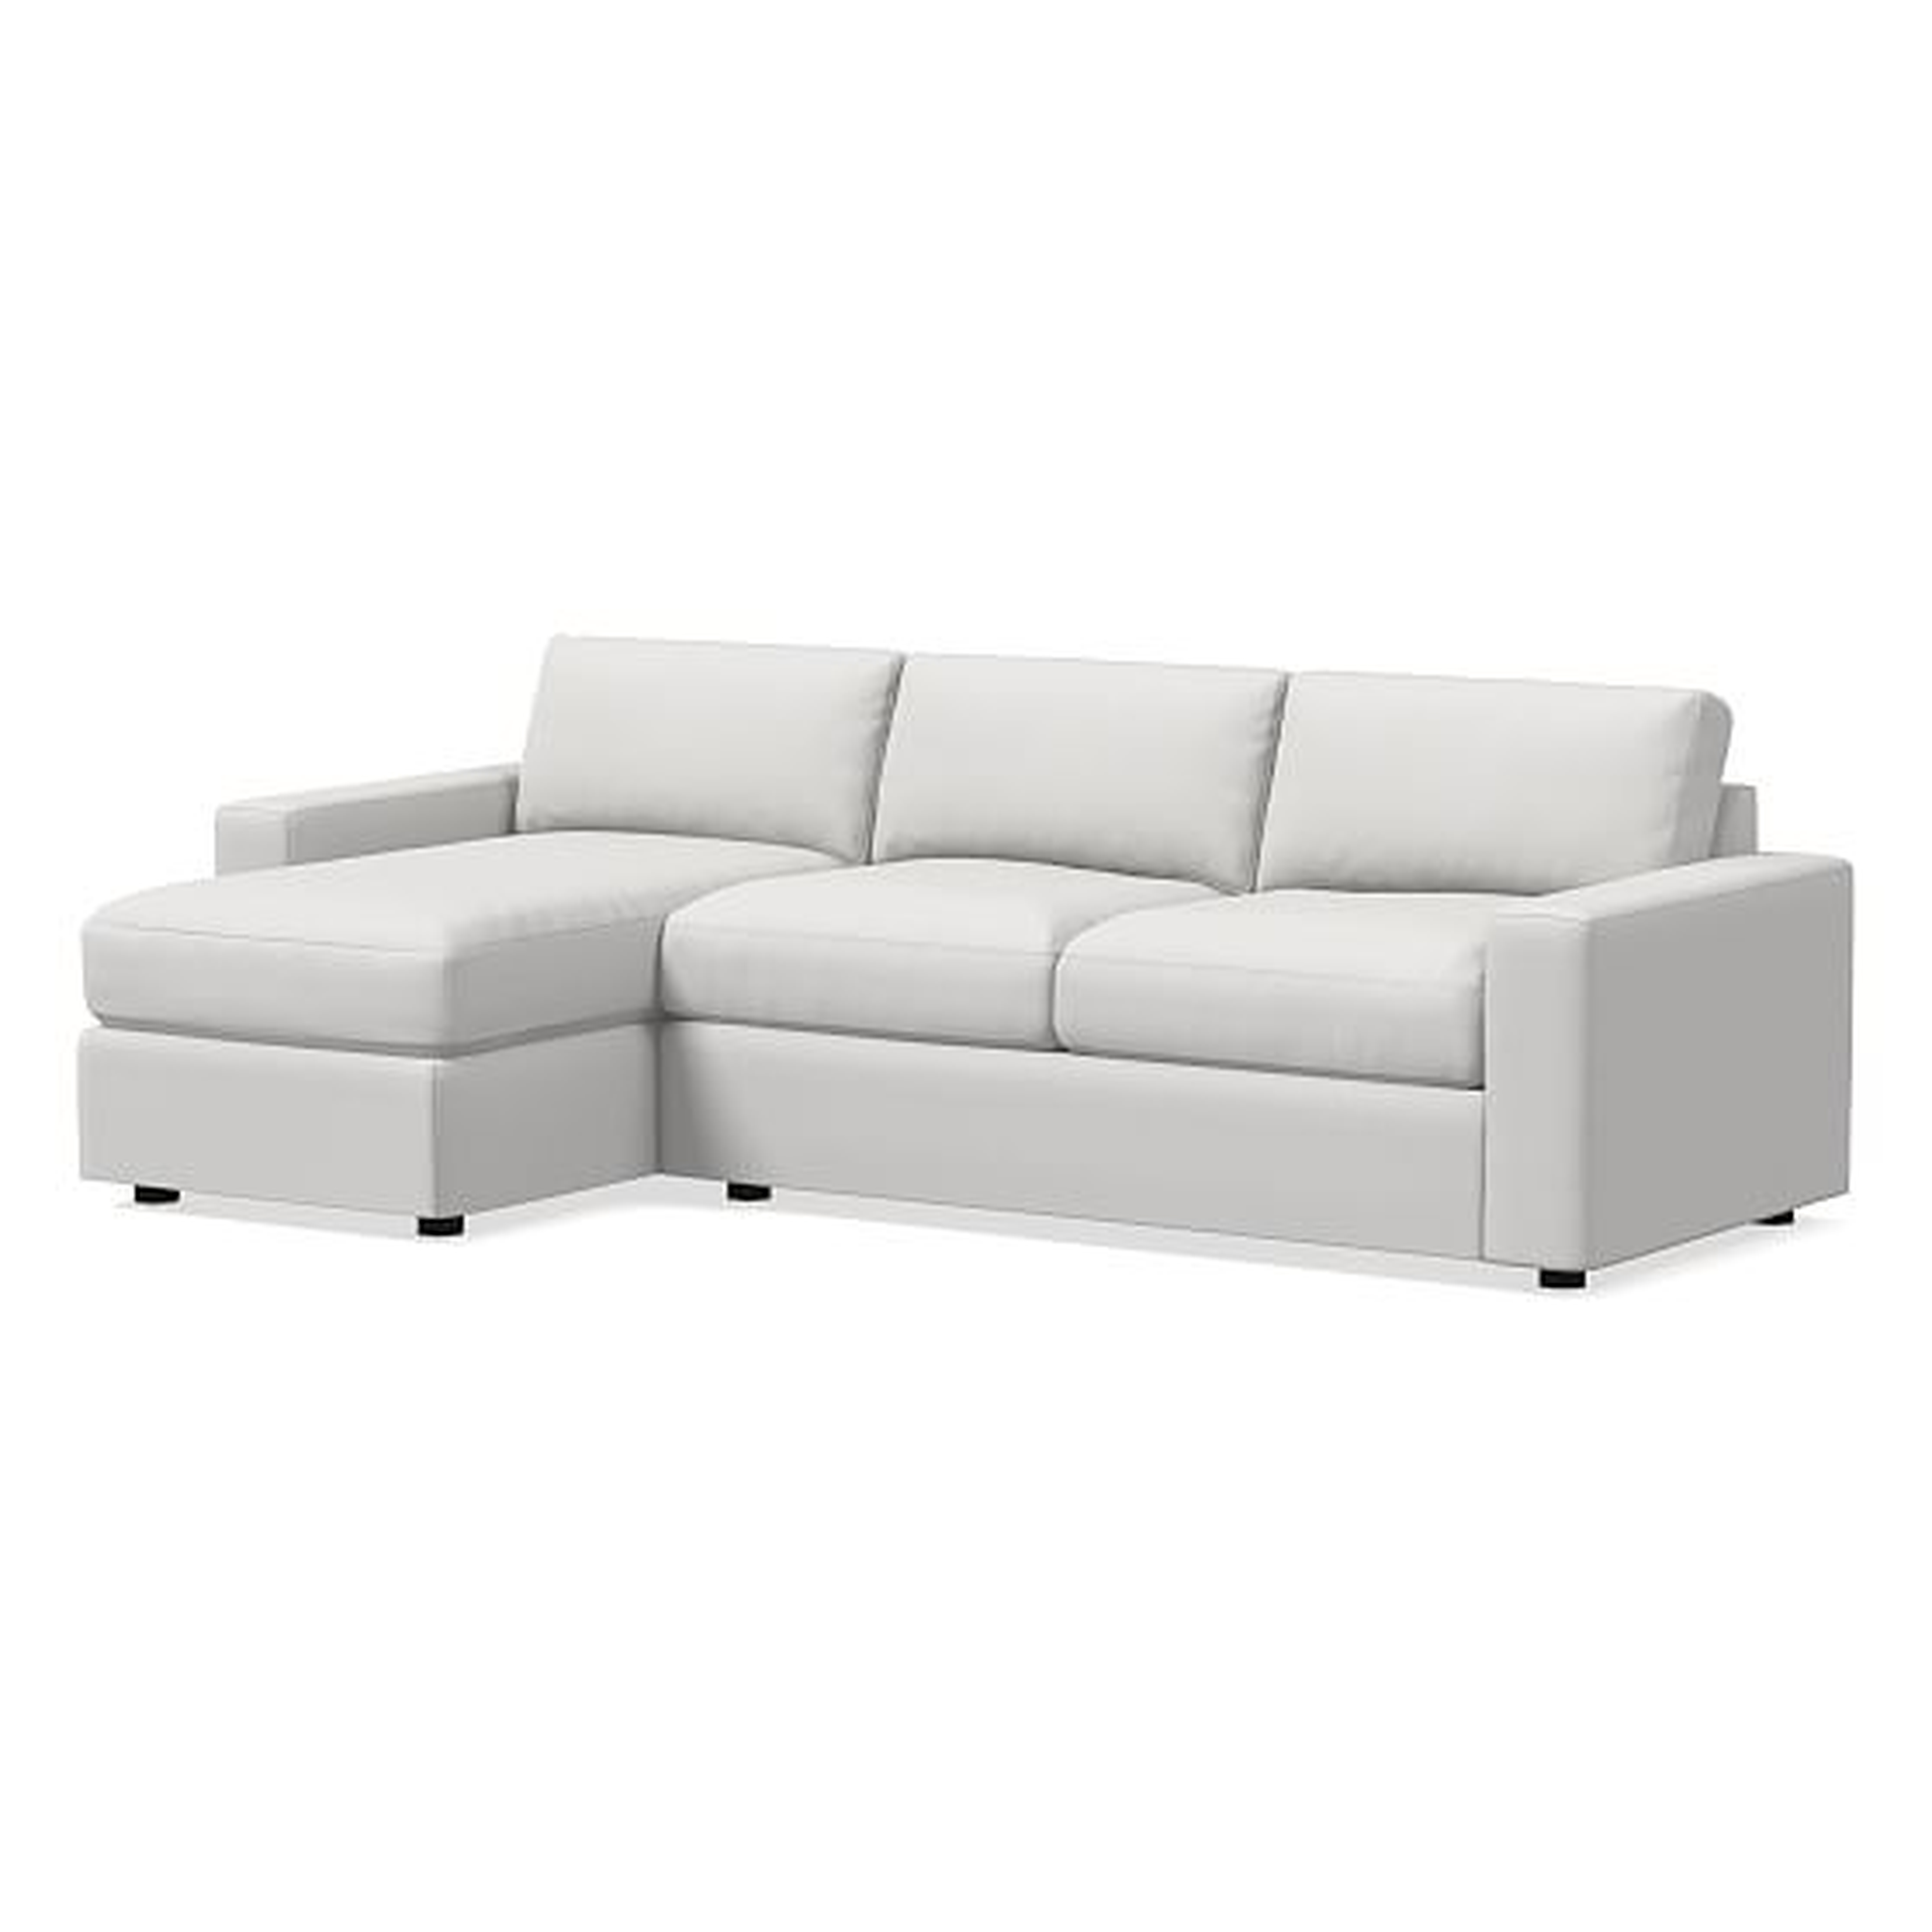 Urban 111" Left Sleeper Sectional w/ Storage, Performance Washed Canvas, White, Poly-Fill - West Elm